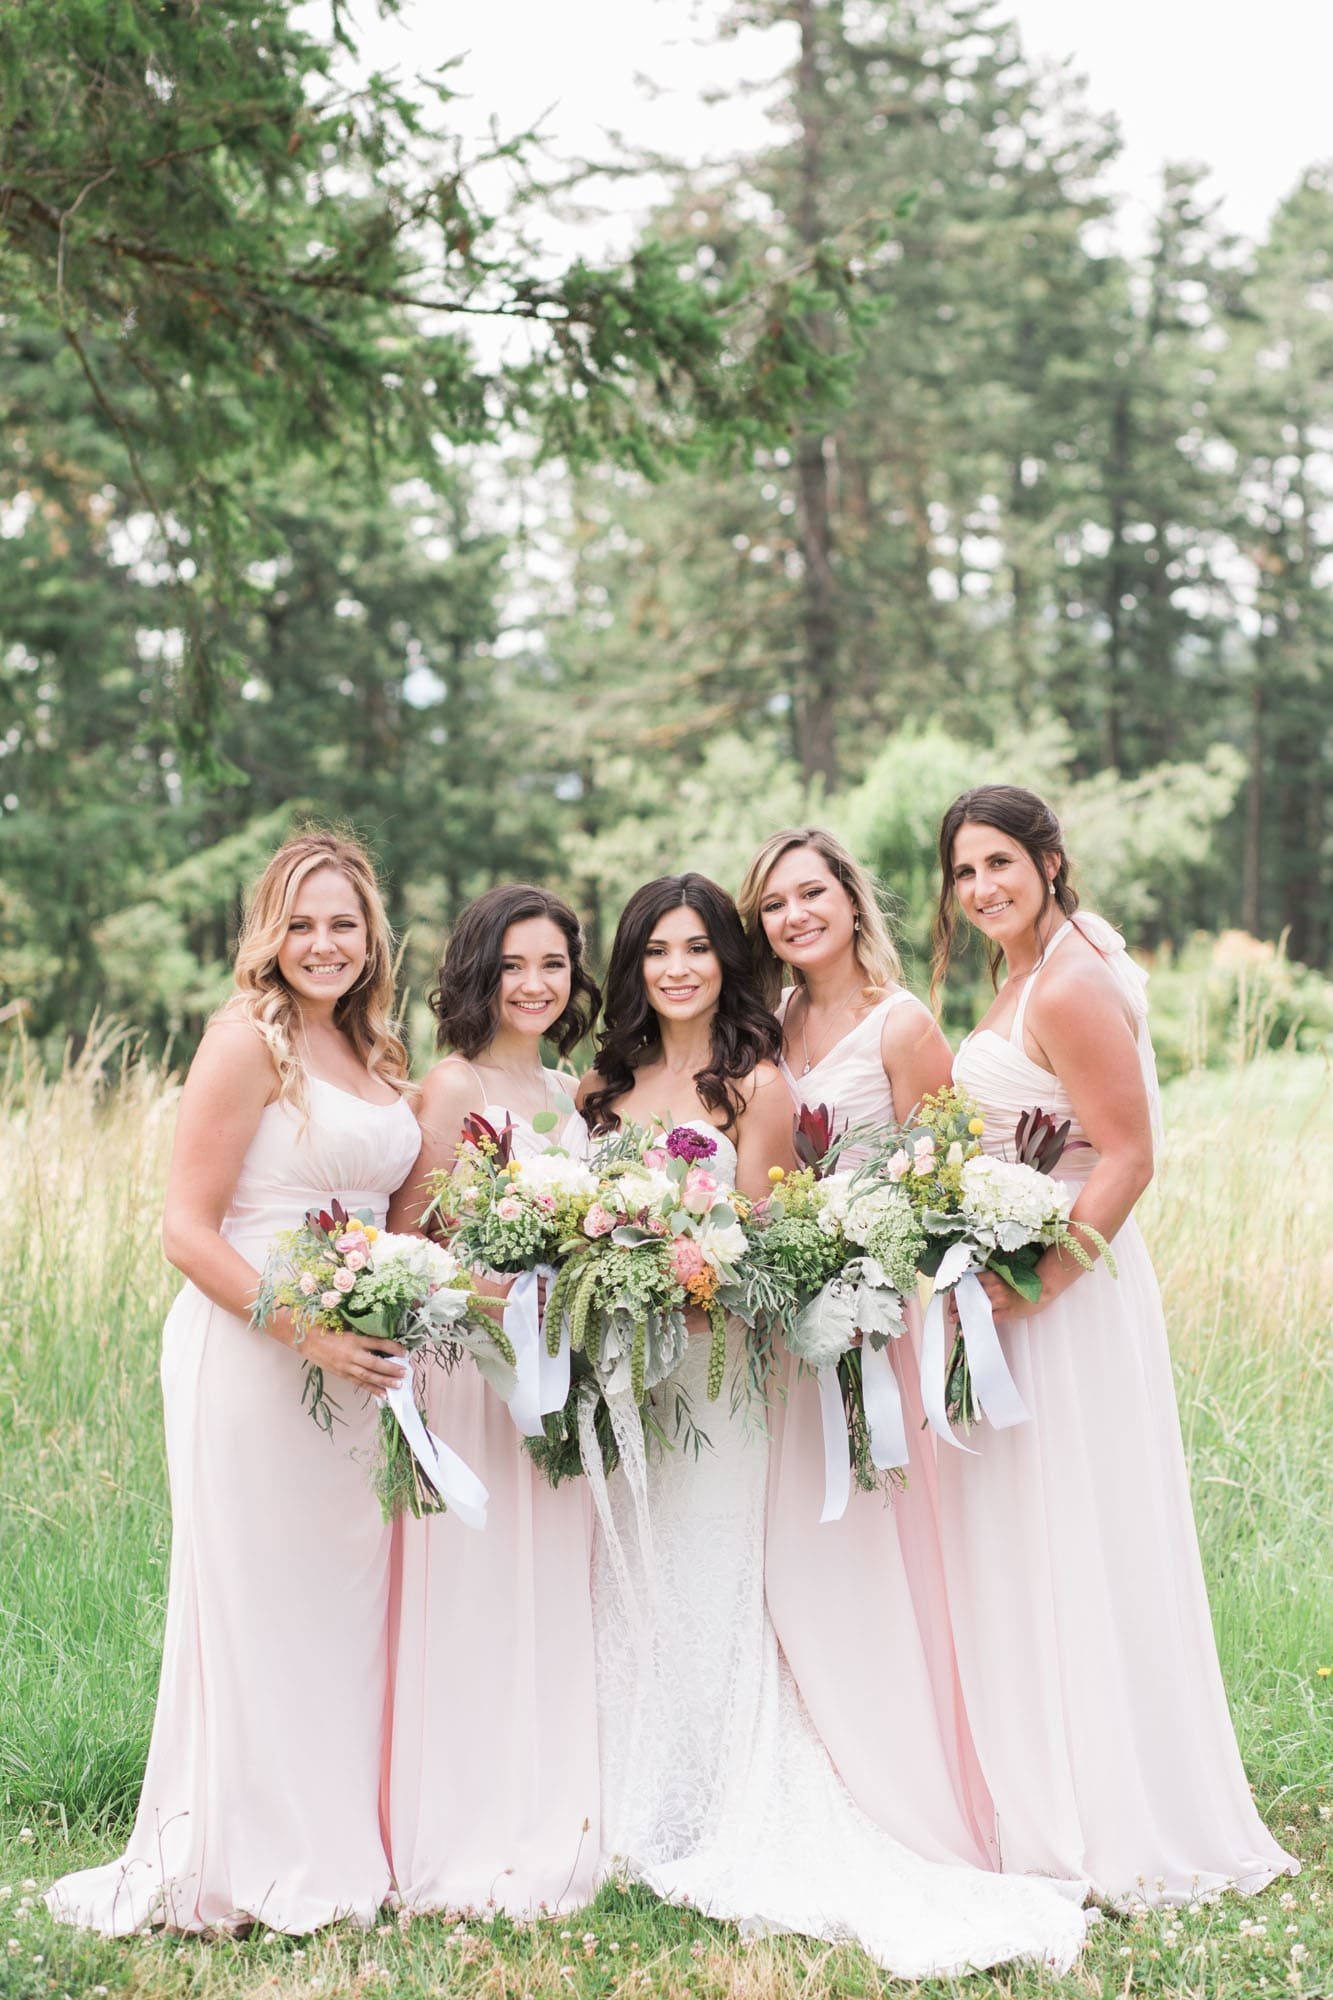 Bridesmaids in blush pink dresses with colorful bouquets at Oregon wedding venue